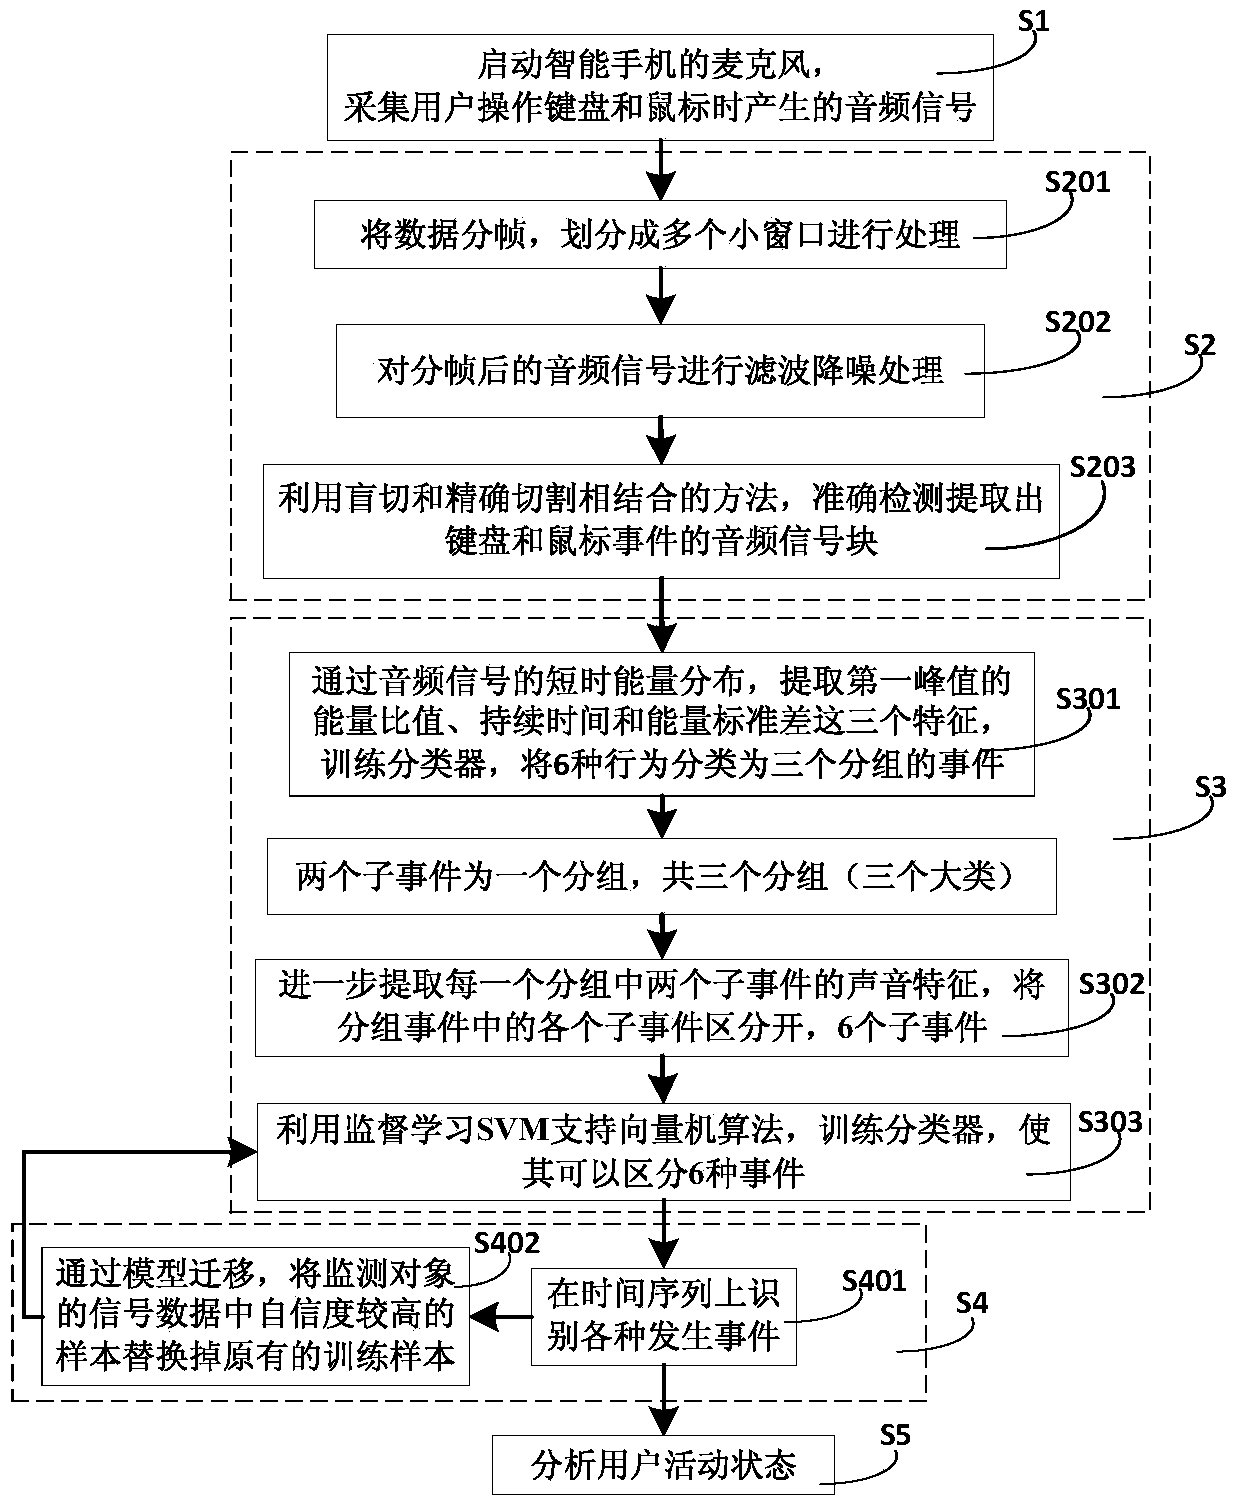 Personal computer using behavior monitoring method and system based on acoustic communication channel